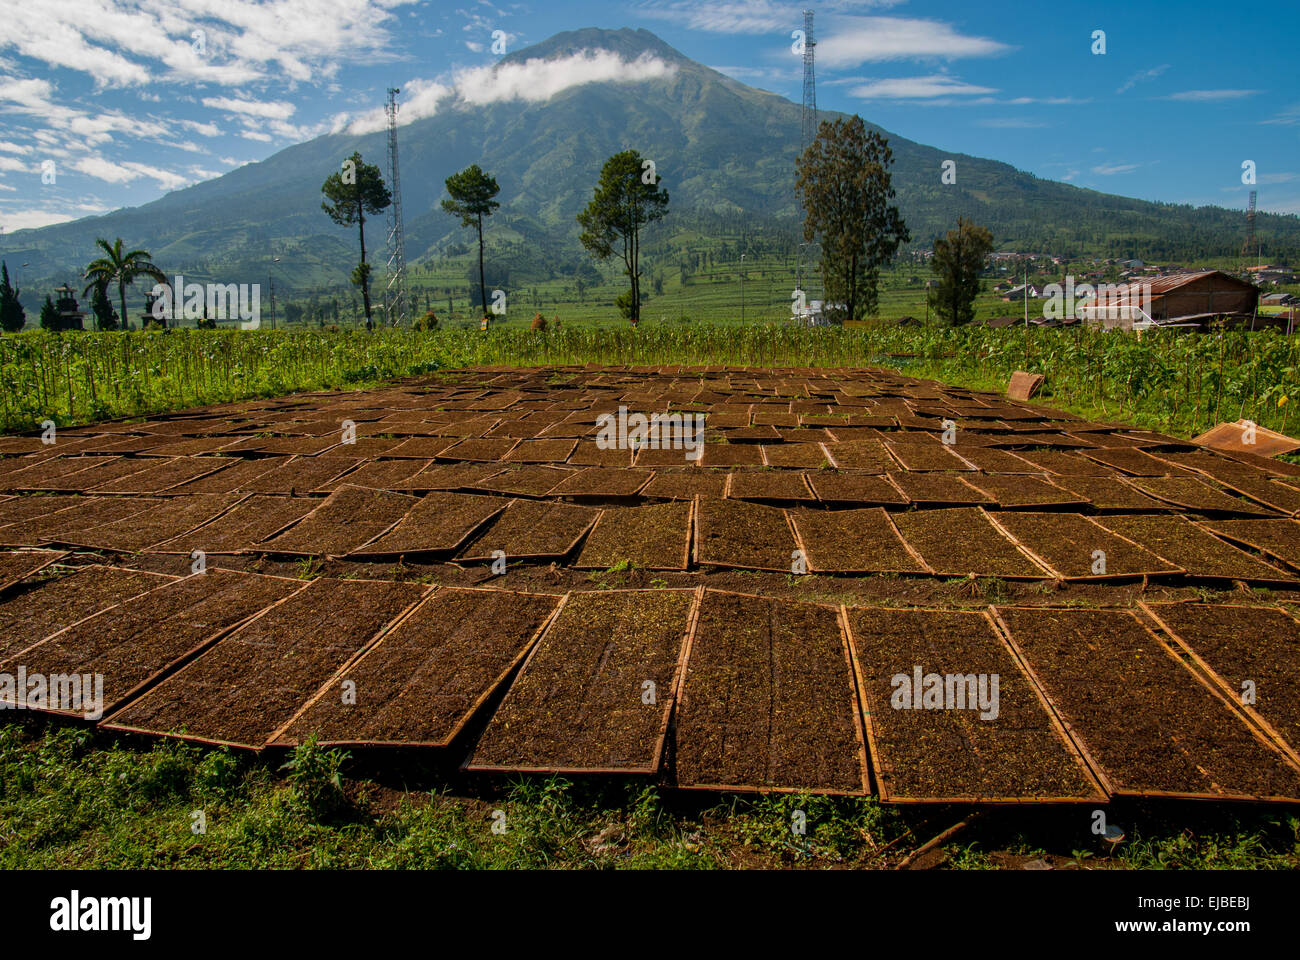 Sun-dried tobacco in a tobacco producing village in Temanggung, Central Java, Indonesia. Stock Photo